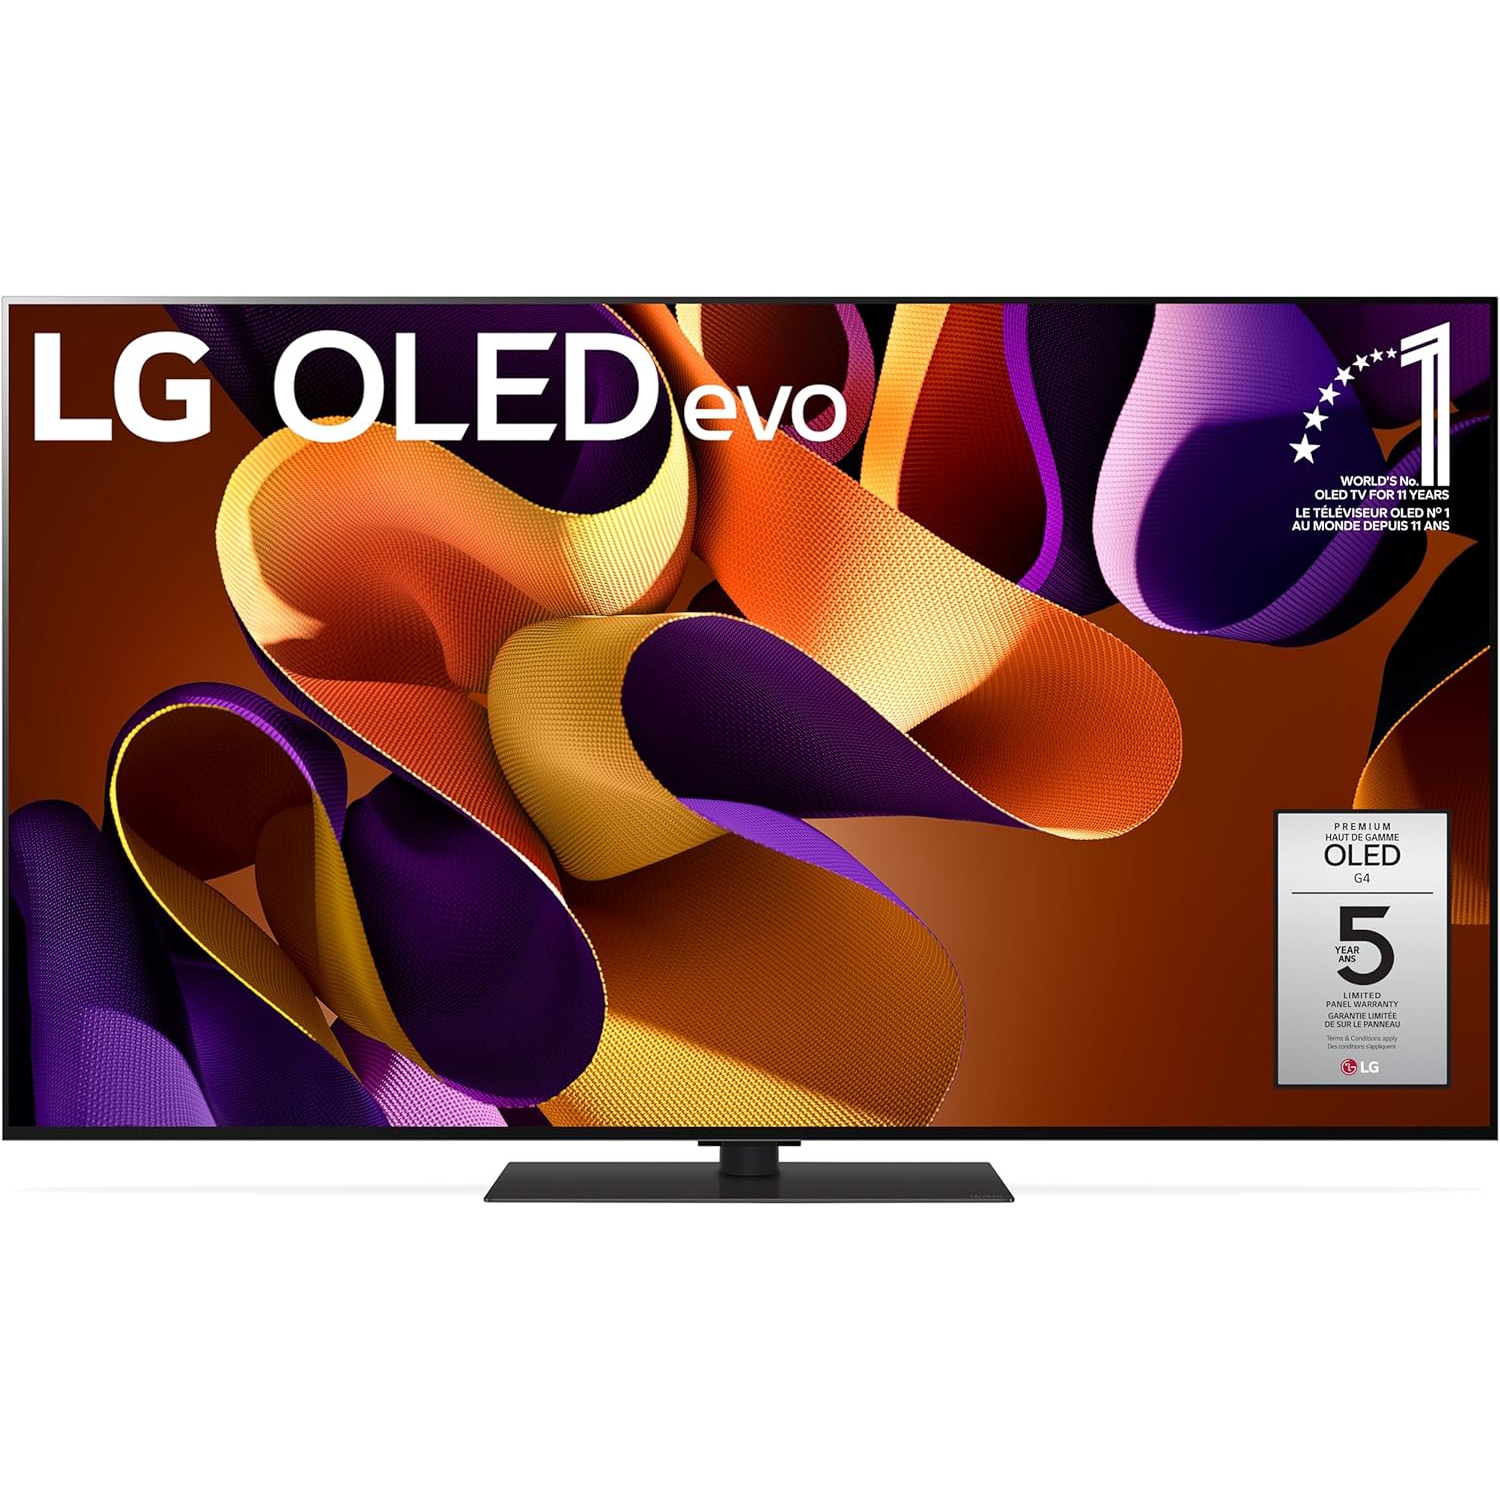 LG 55-Inch G4 OLED evo 4K Smart TV - α11 AI Processor 4K, Alexa Built-in, 144Hz Refresh Rate, HDMI 2.1, G-Sync, FreeSync, Dolby Vision, Dolby Atmos, Stand Included (OLED55G4SUB, 20